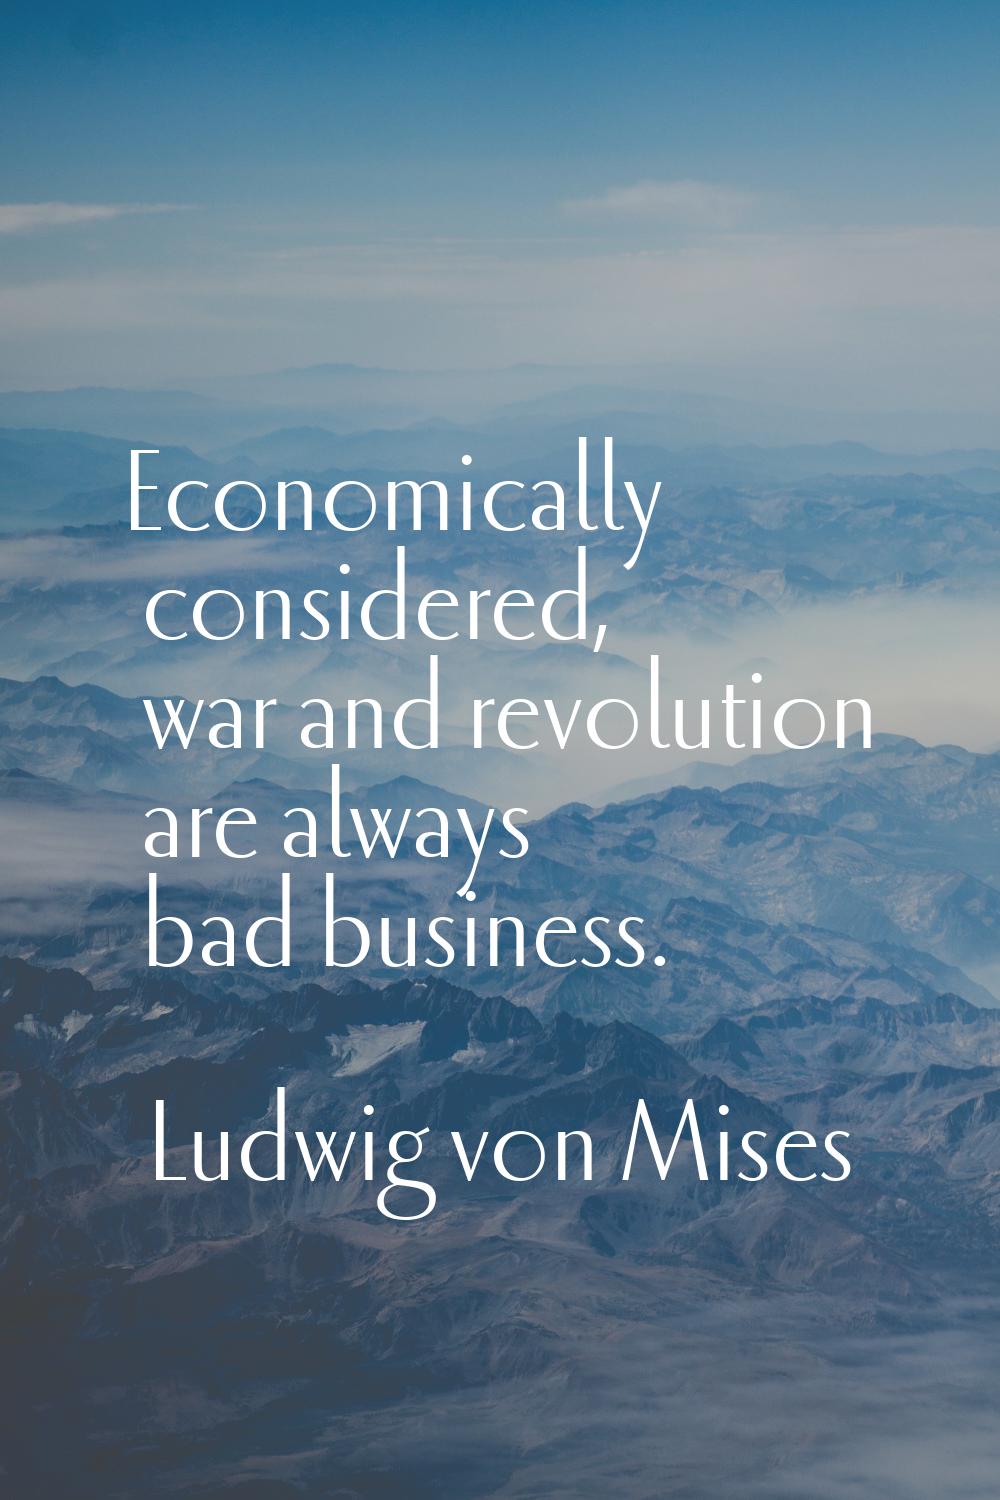 Economically considered, war and revolution are always bad business.